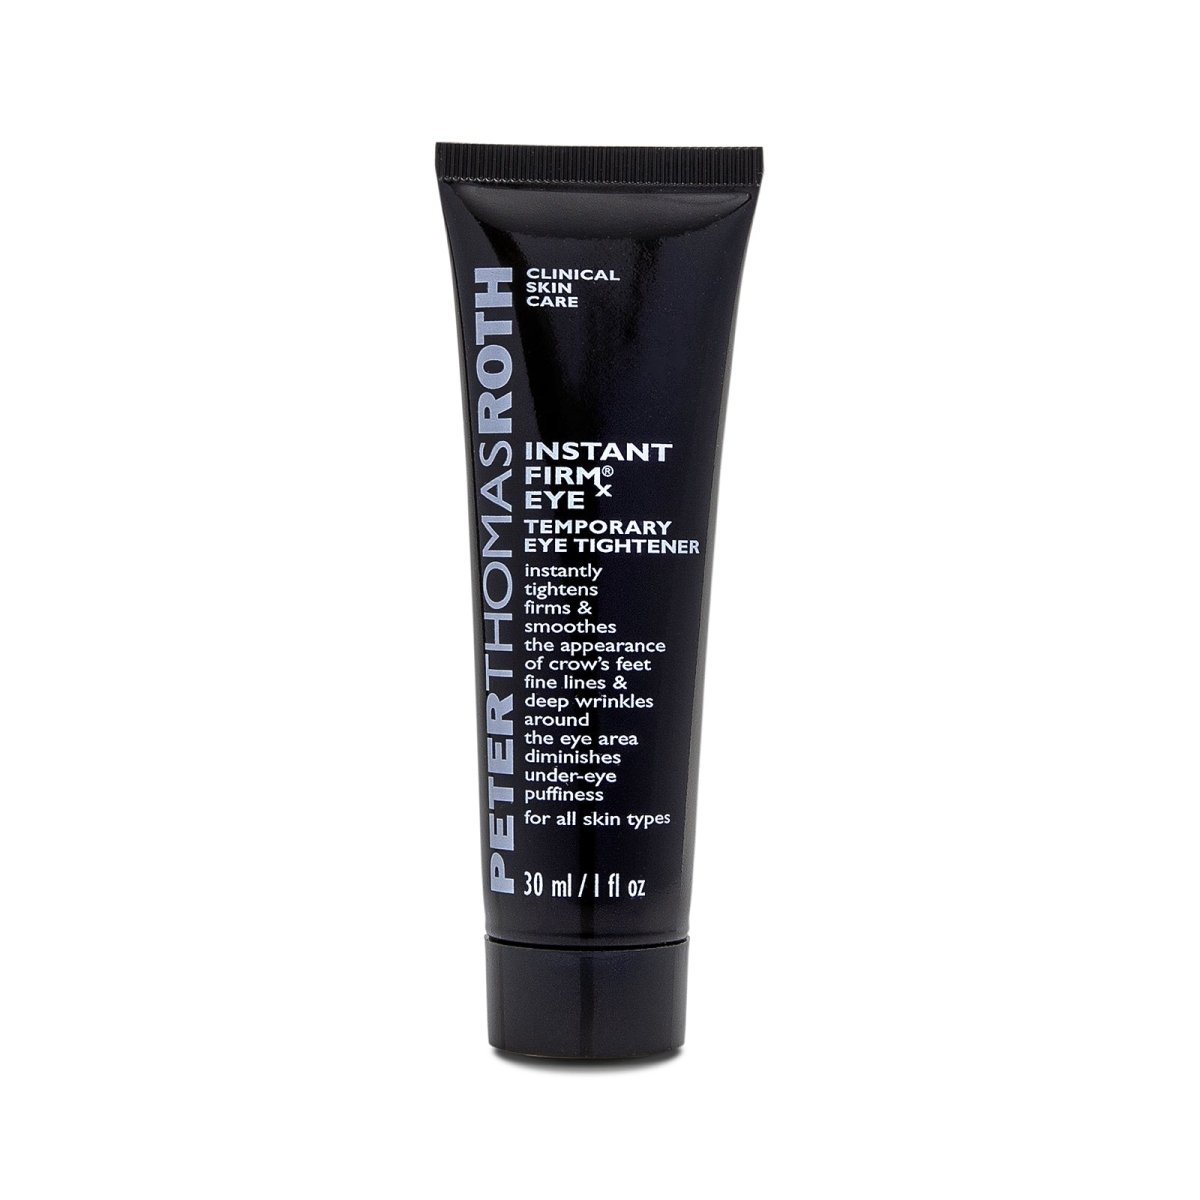 Peter Thomas Roth Instant FIRMx® Temporary Eye Tightener - SkincareEssentials